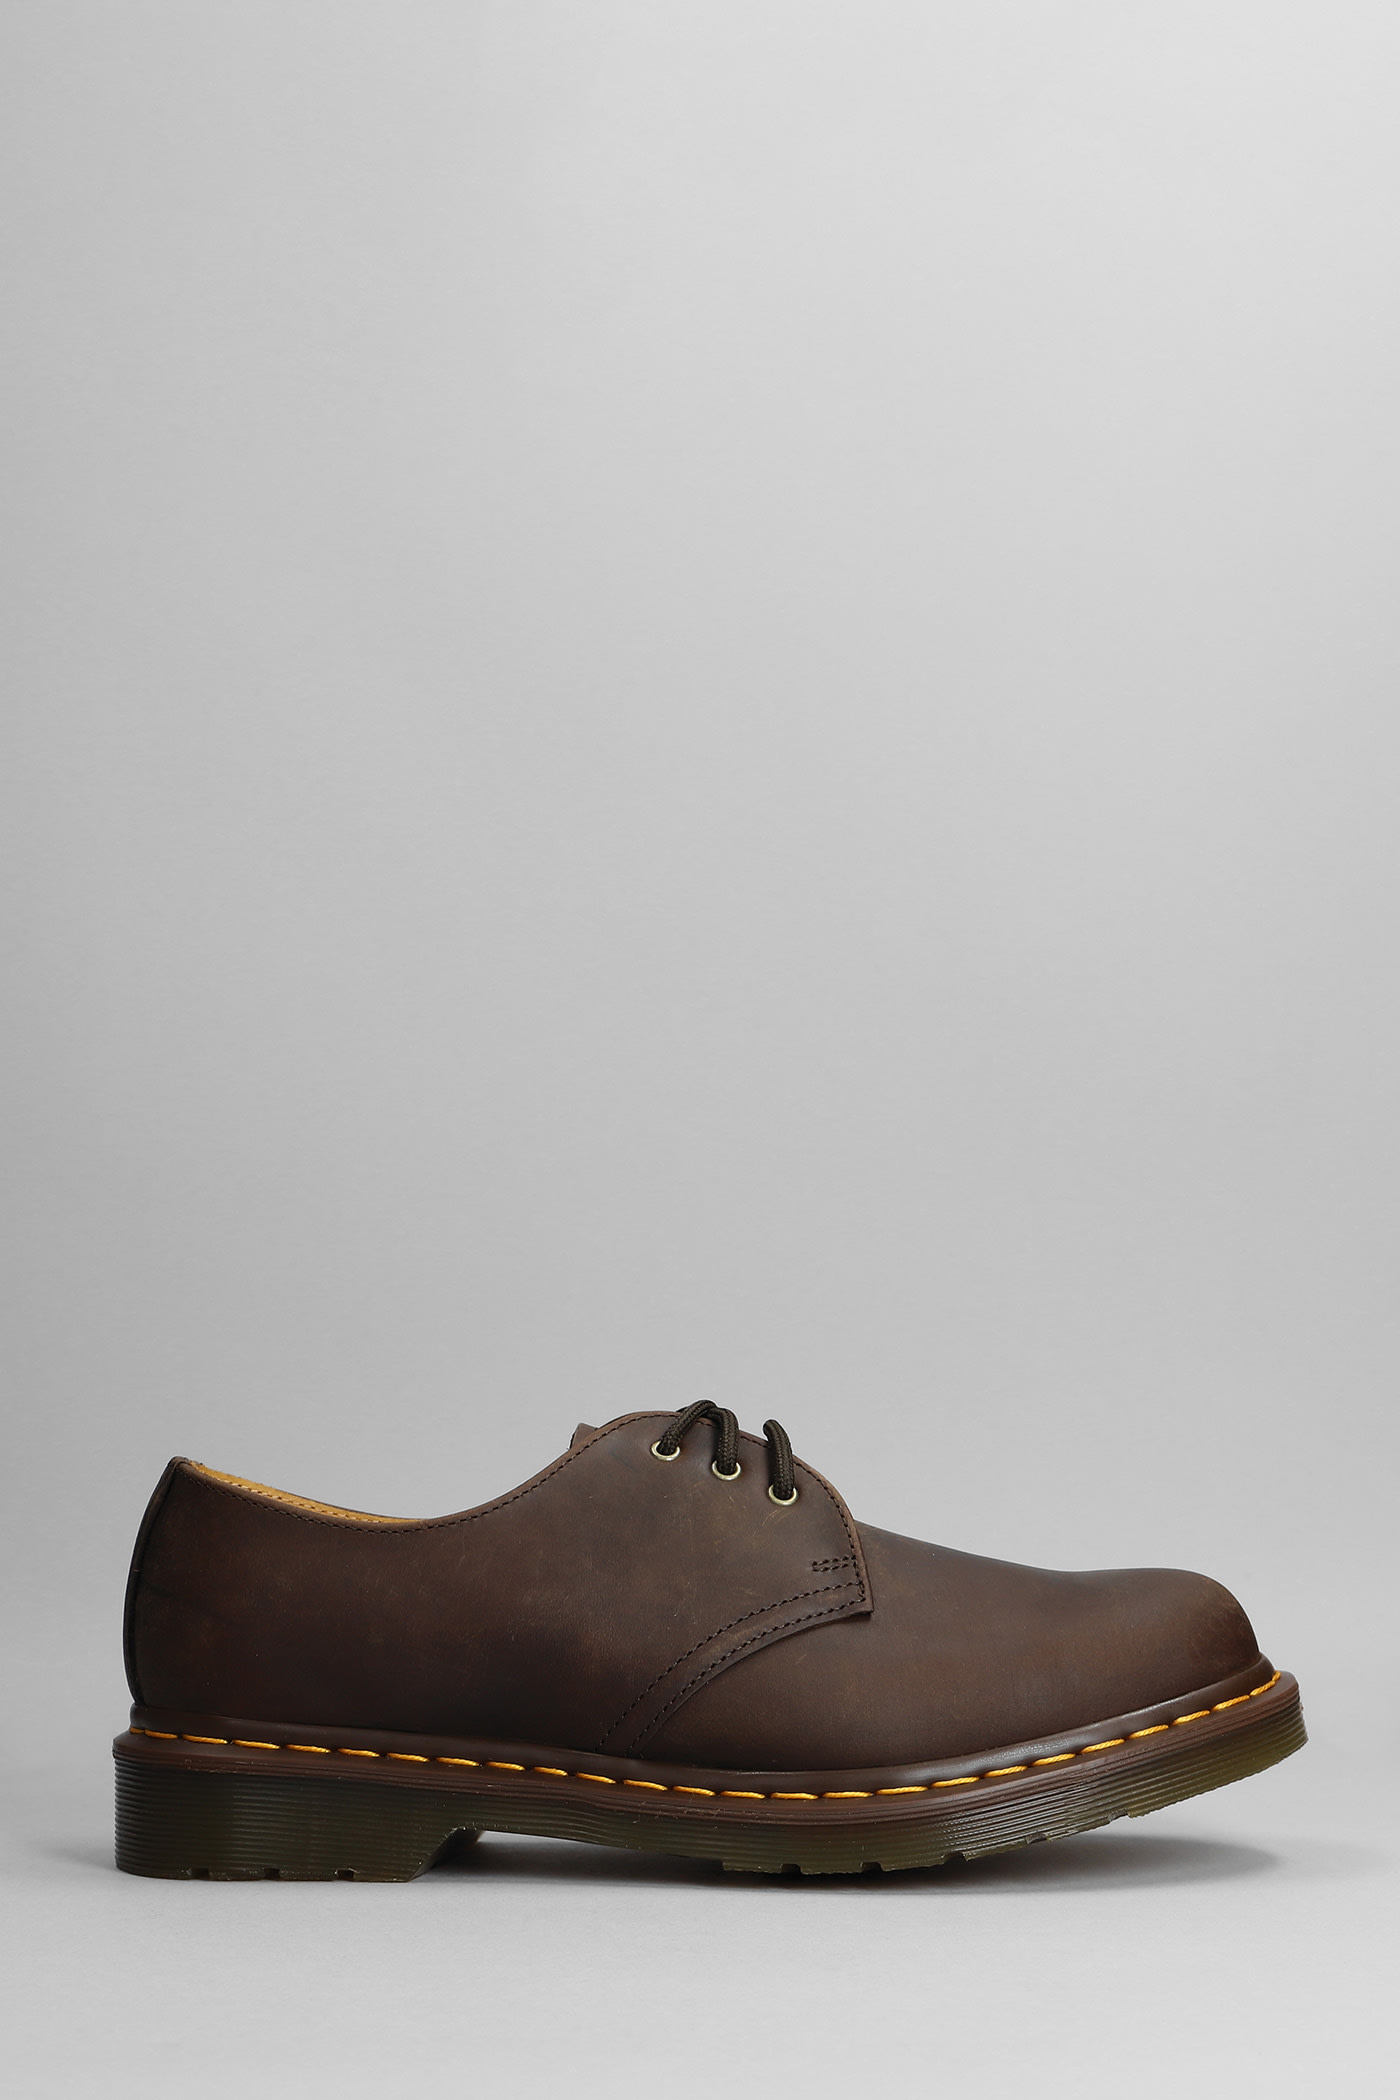 Dr. Martens 1461 Crazy Horse Lace Up Shoes In Brown Leather